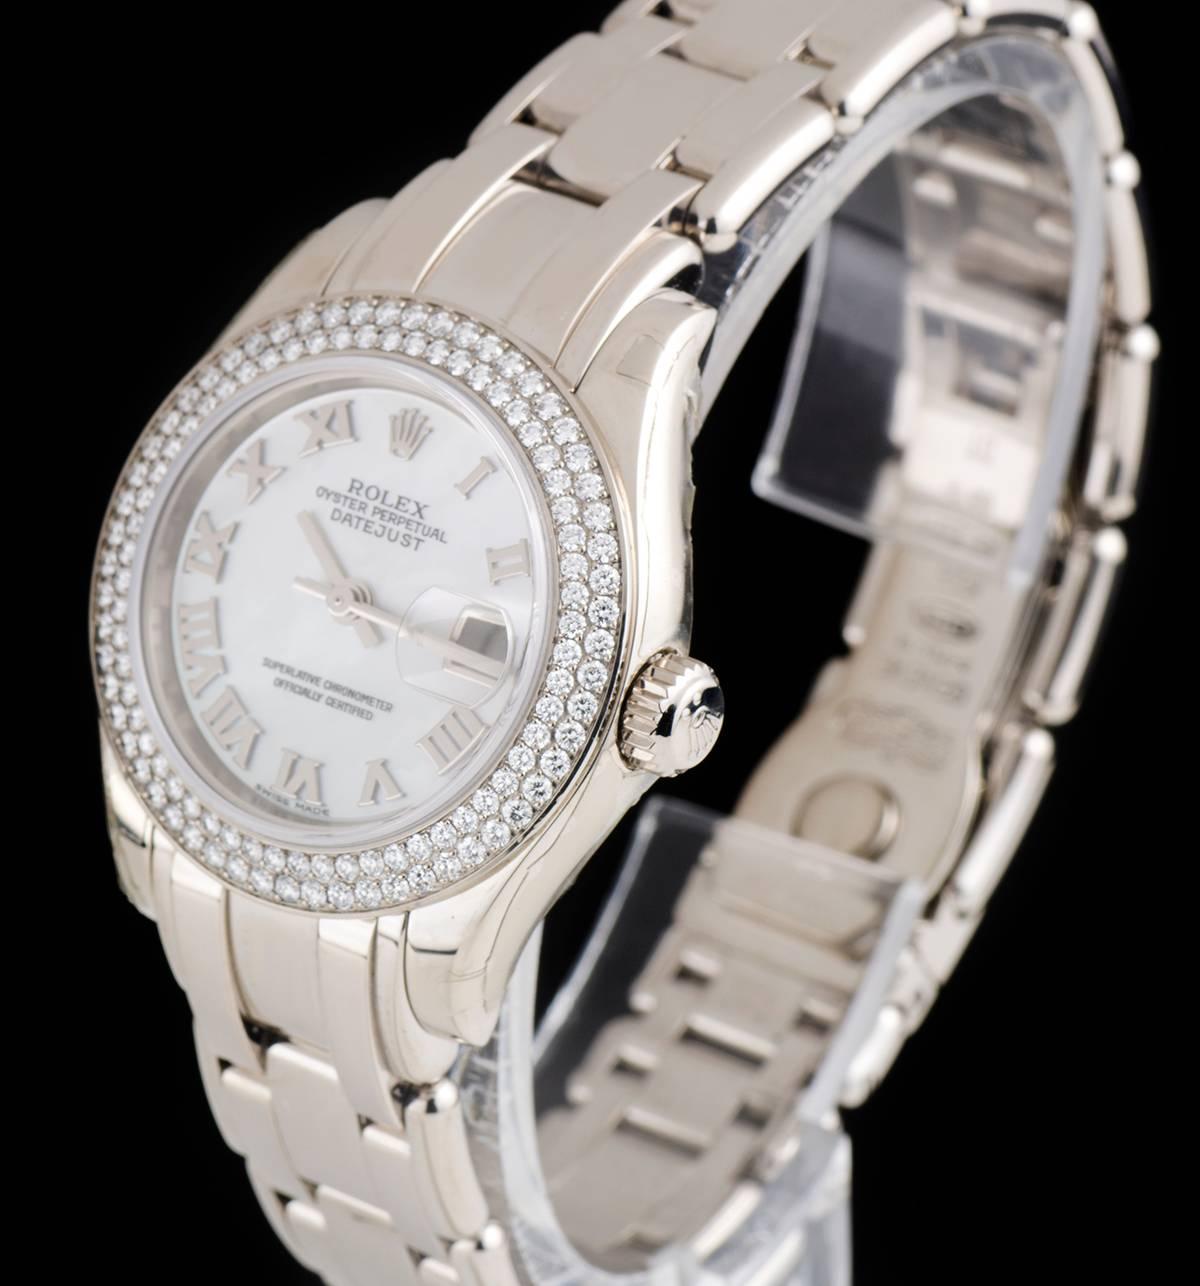 An Unworn 18k White Gold Oyster Perpetual Pearlmaster Datejust NOS Ladies Wristwatch, white mother of pearl dial with applied roman numerals, date a 3 0'clock, a fixed 18k white gold bezel set with approximately 116 round brilliant cut diamonds, an